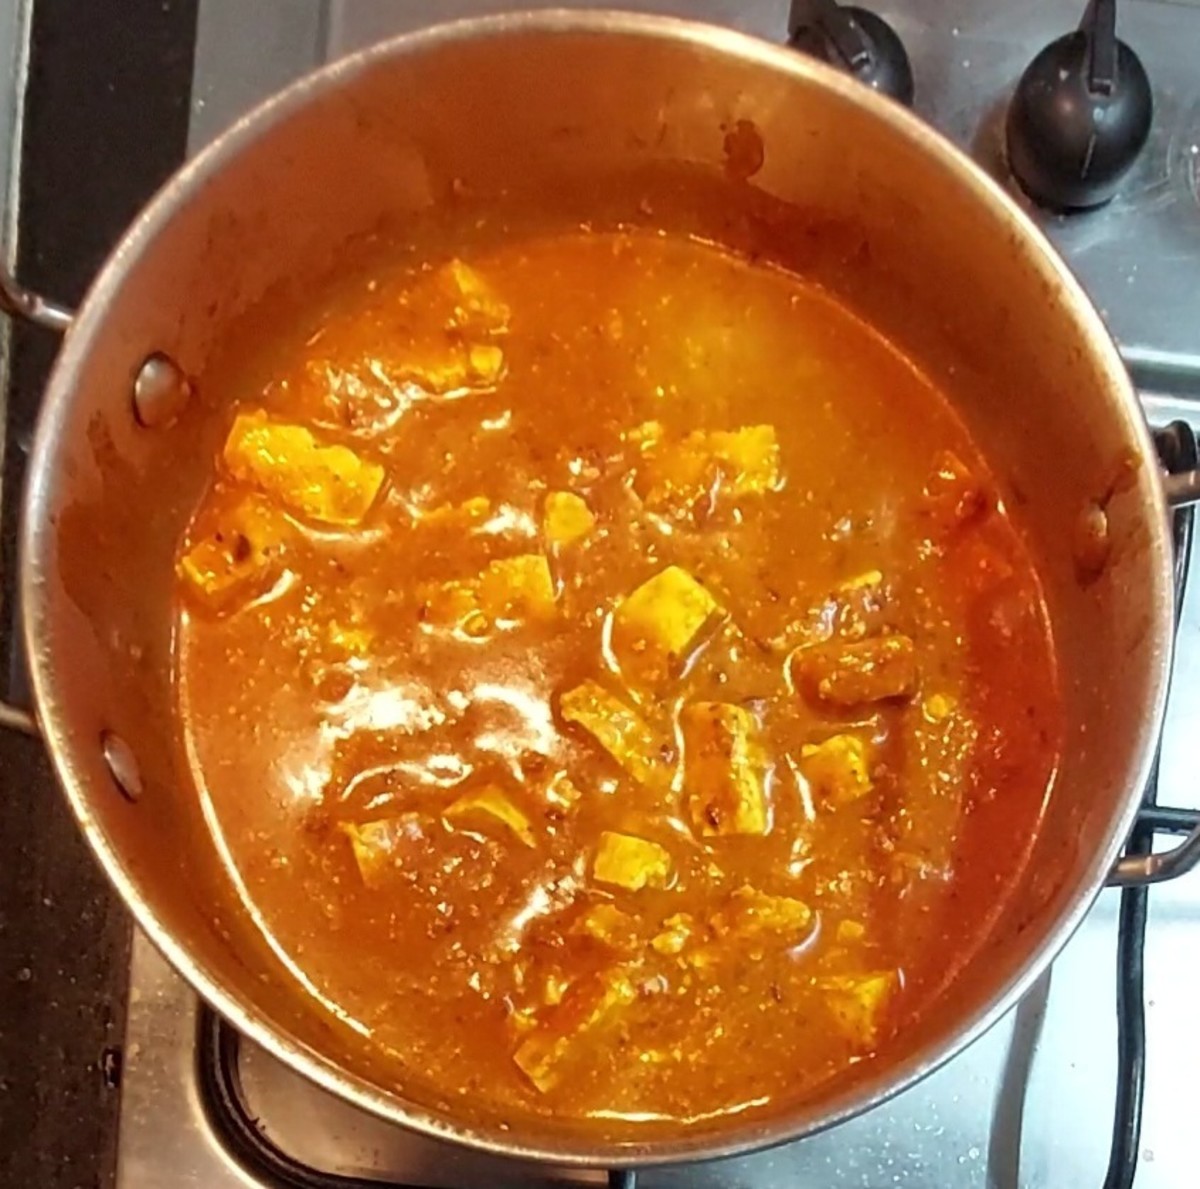 Mix gently without breaking paneer cubes. Add 1/2 cup of water and mix. Close the lid and cook for 2 minutes.